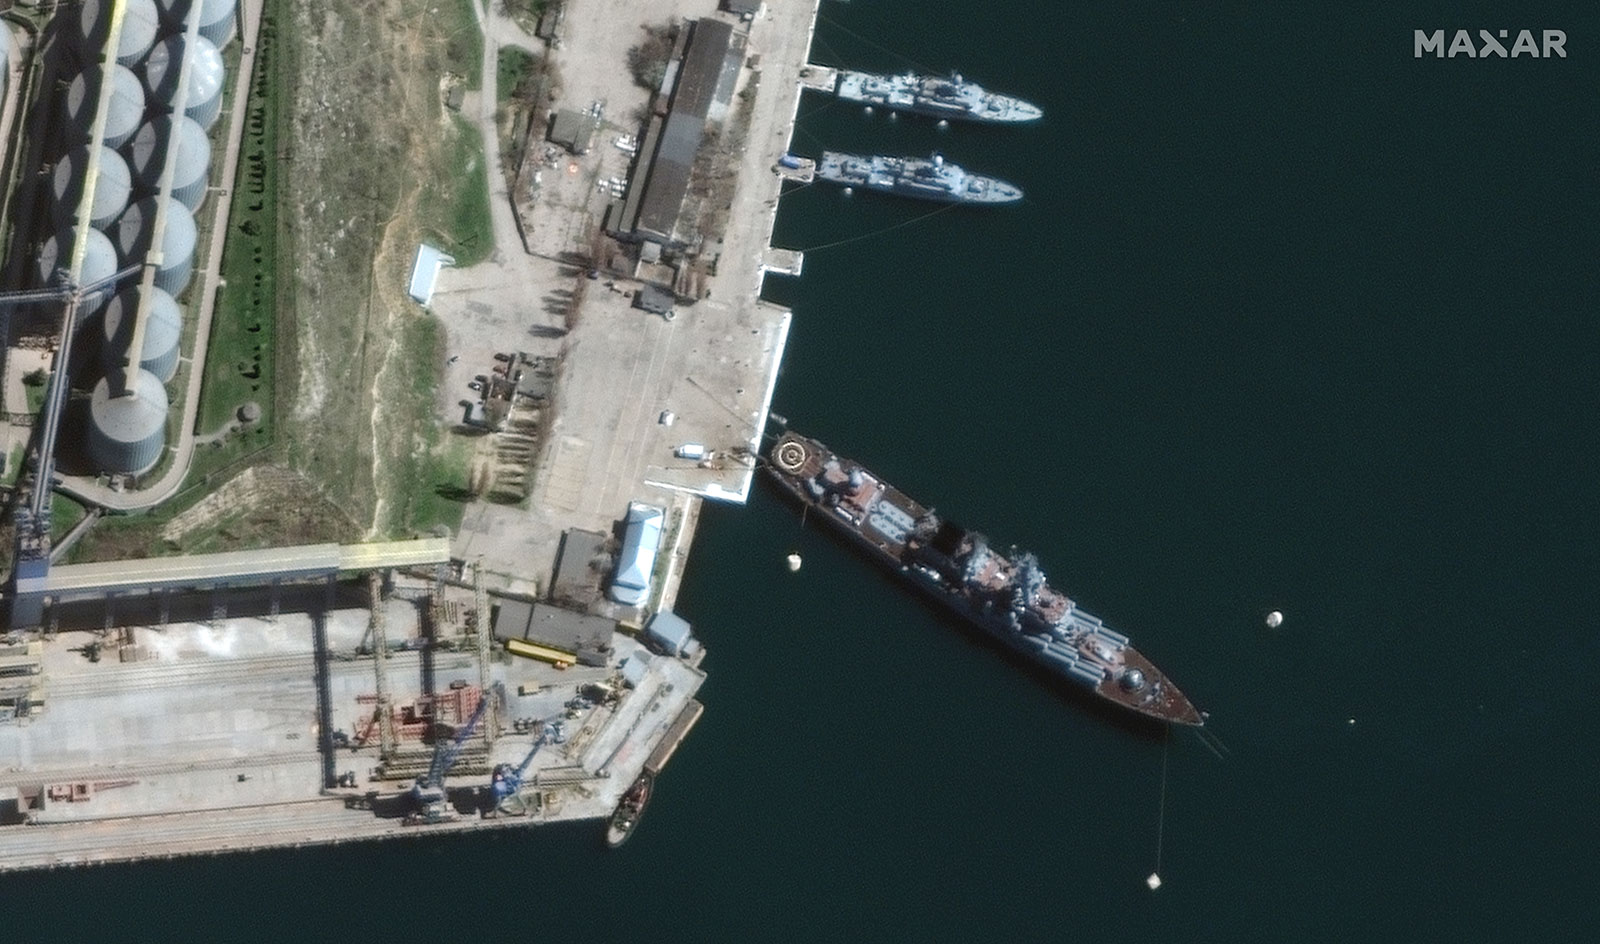 A satellite image shows the Russian warship Moskva in the port of Sevastopol, Crimea on April 7.